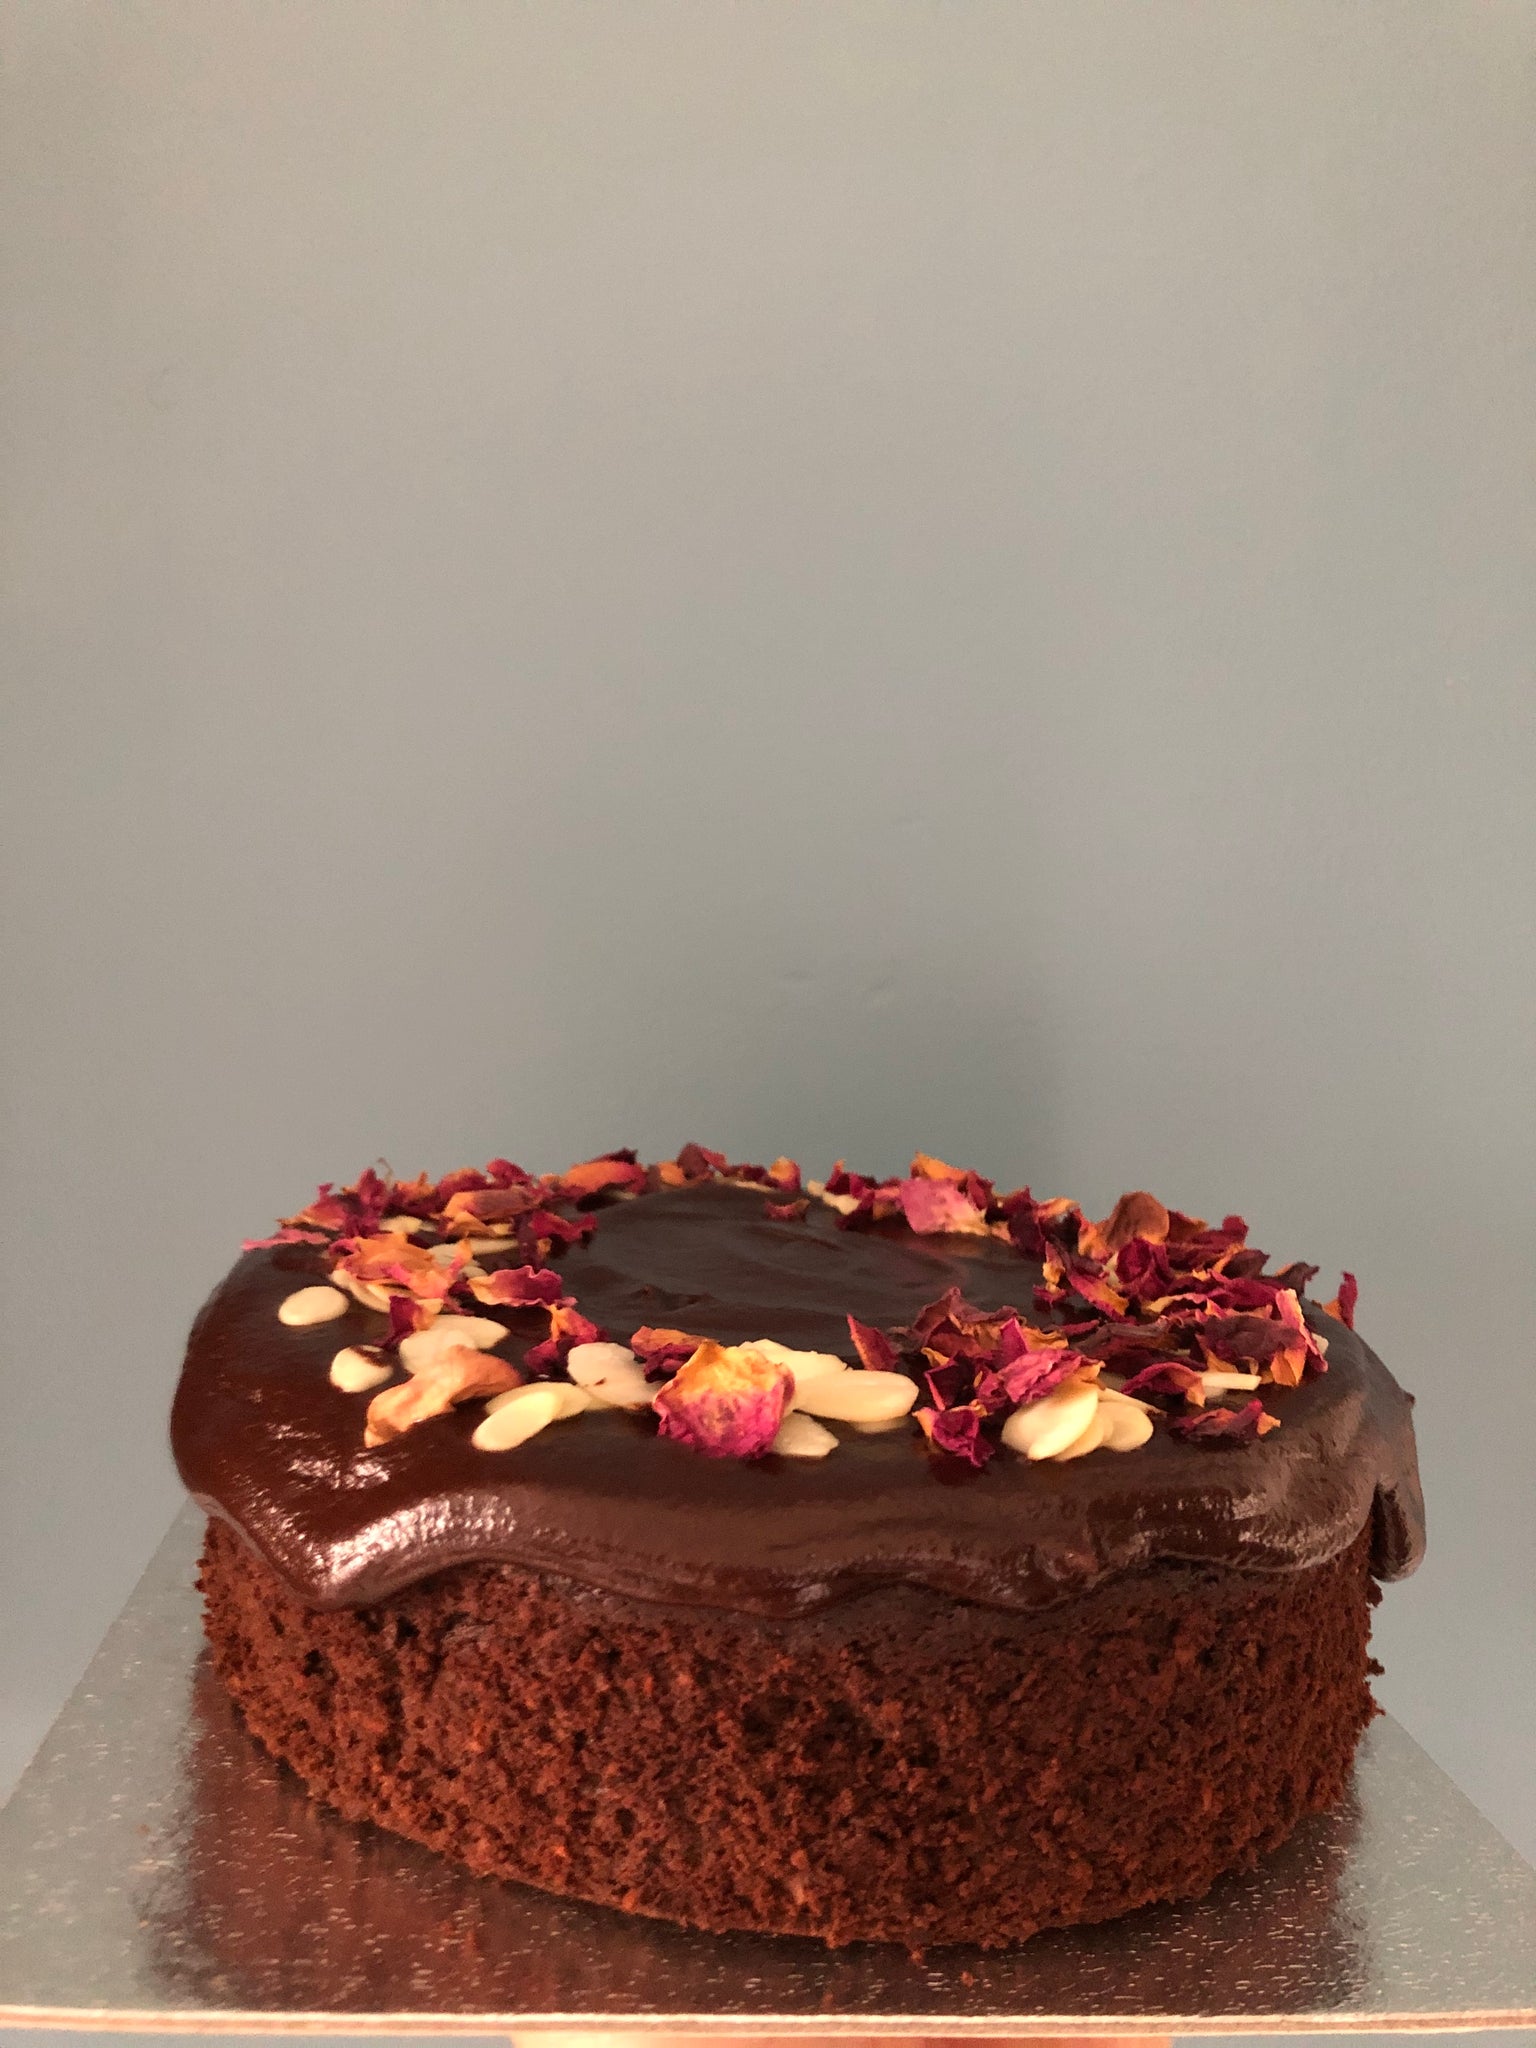 Gluten Free Chocolate Beetroot cake - click here for more options